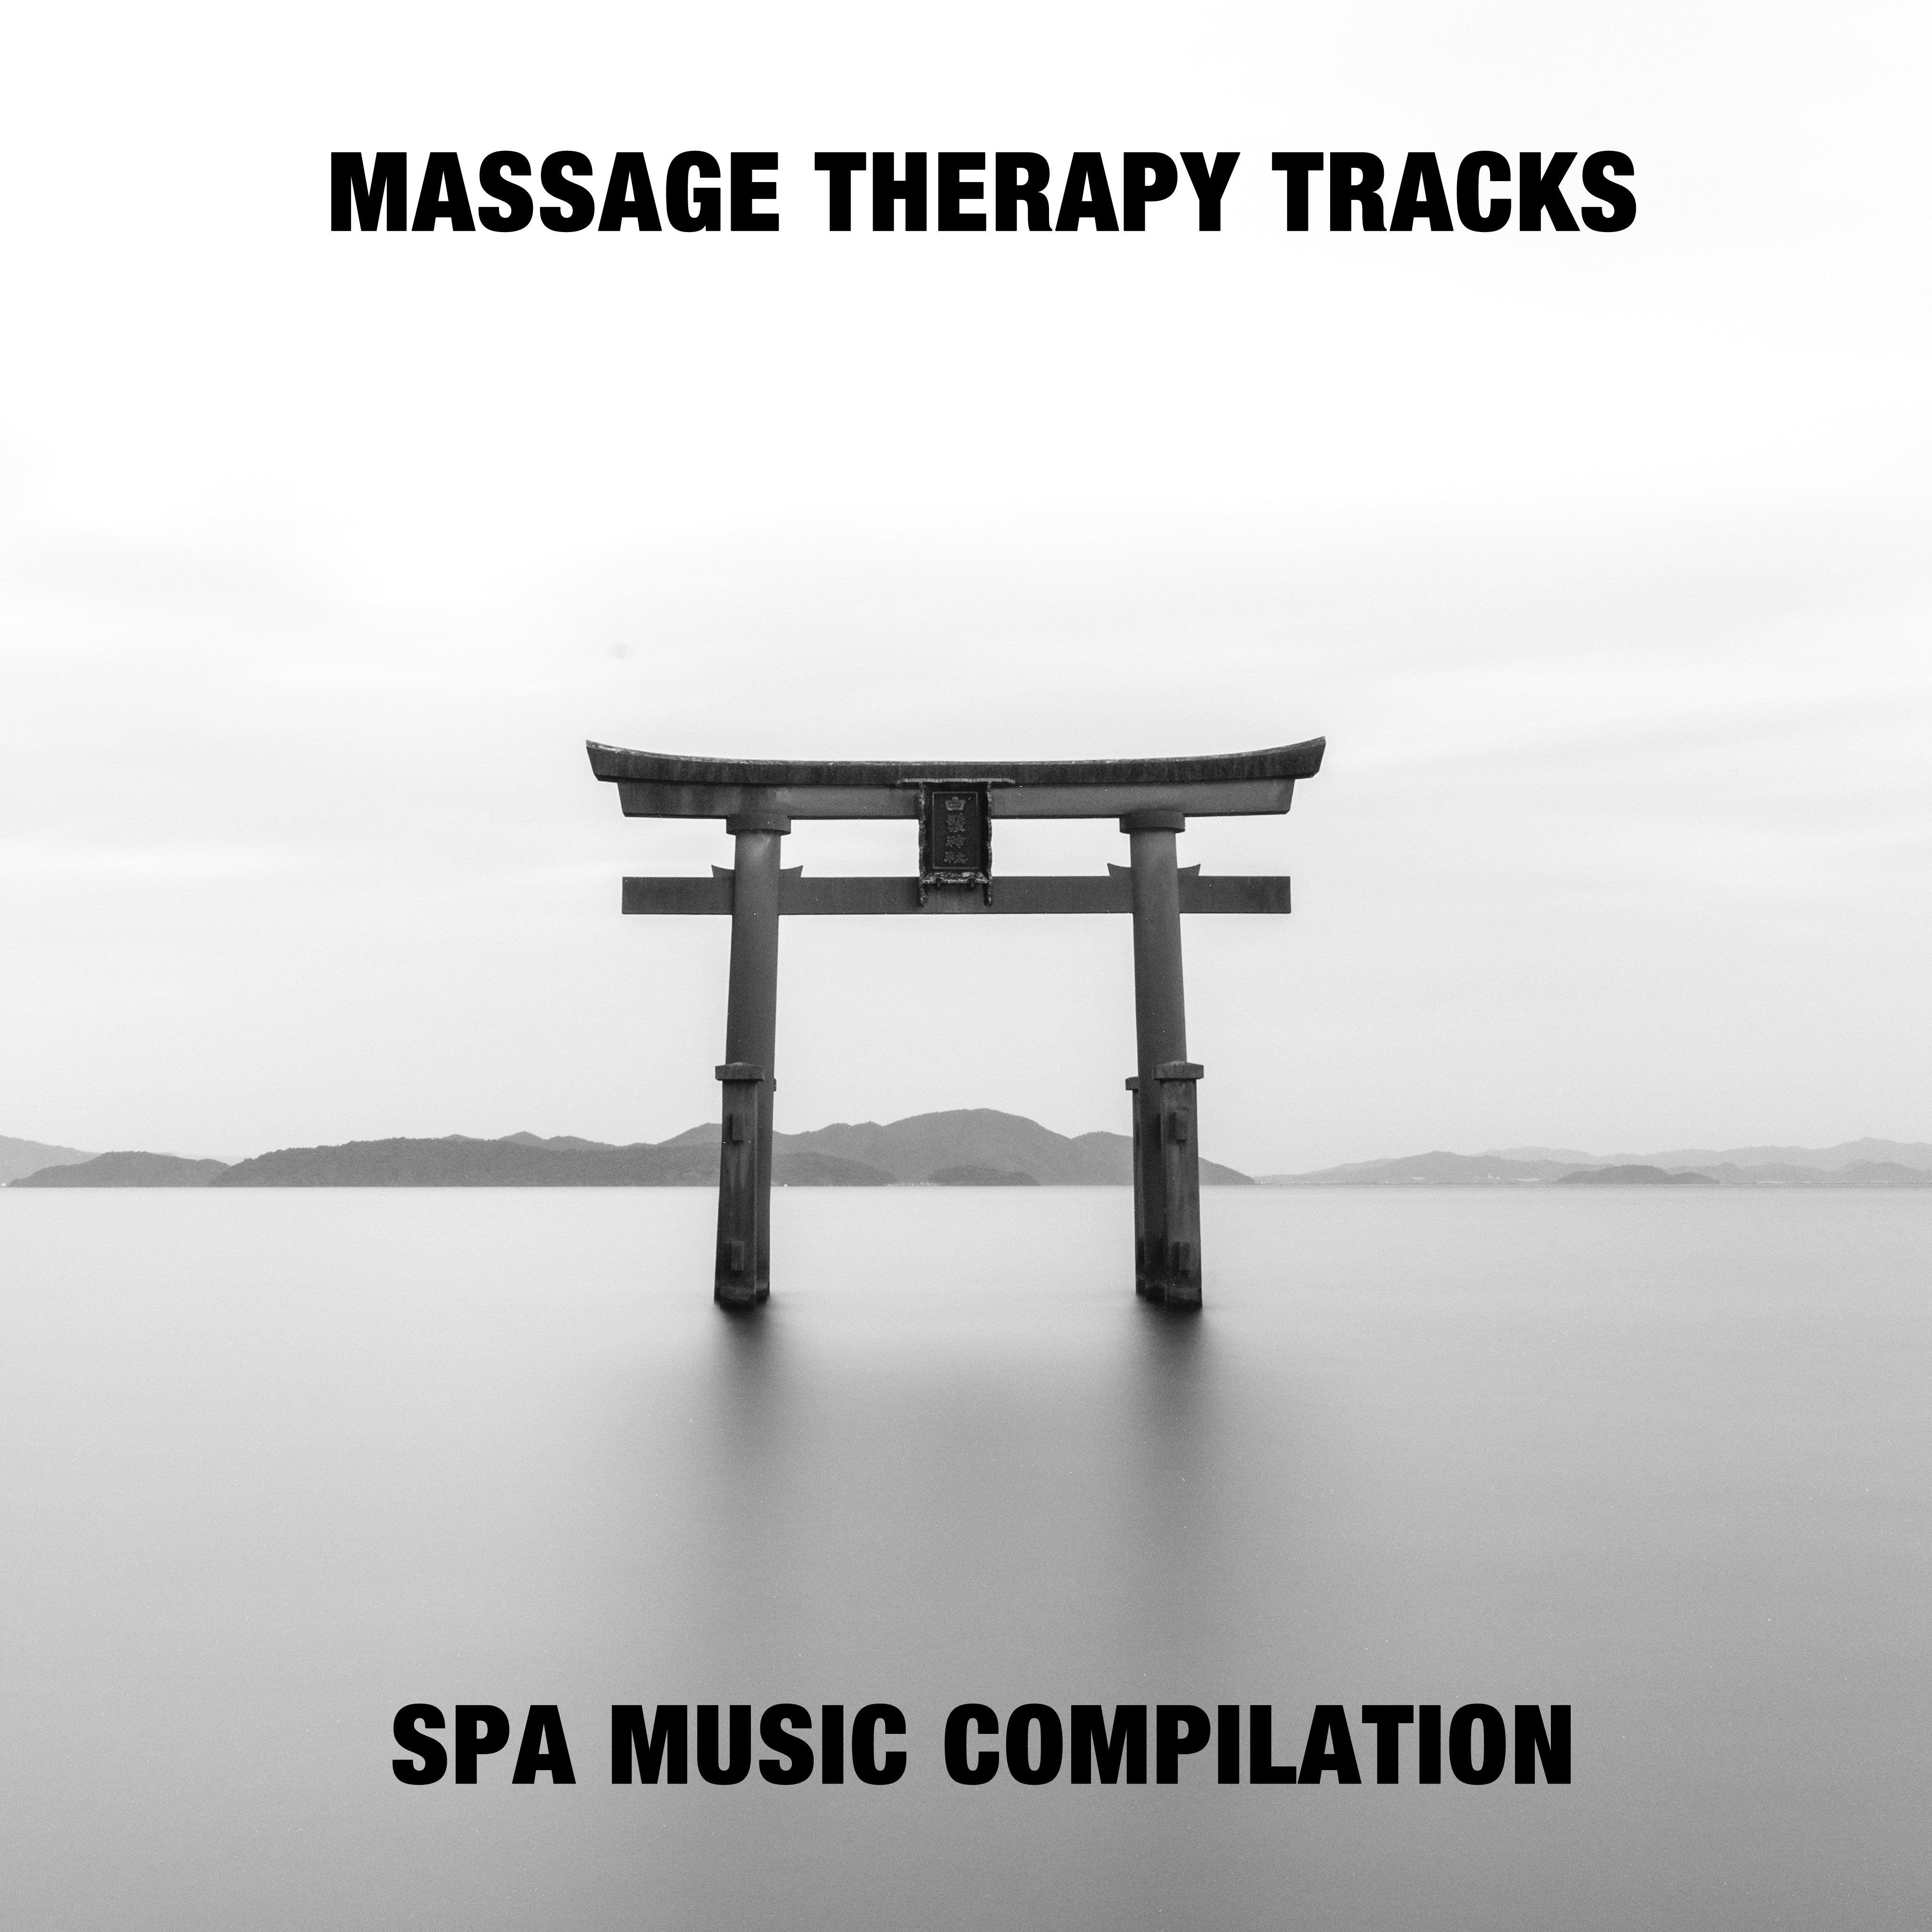 14 Massage Therapy Tracks - Spa Music Compilation